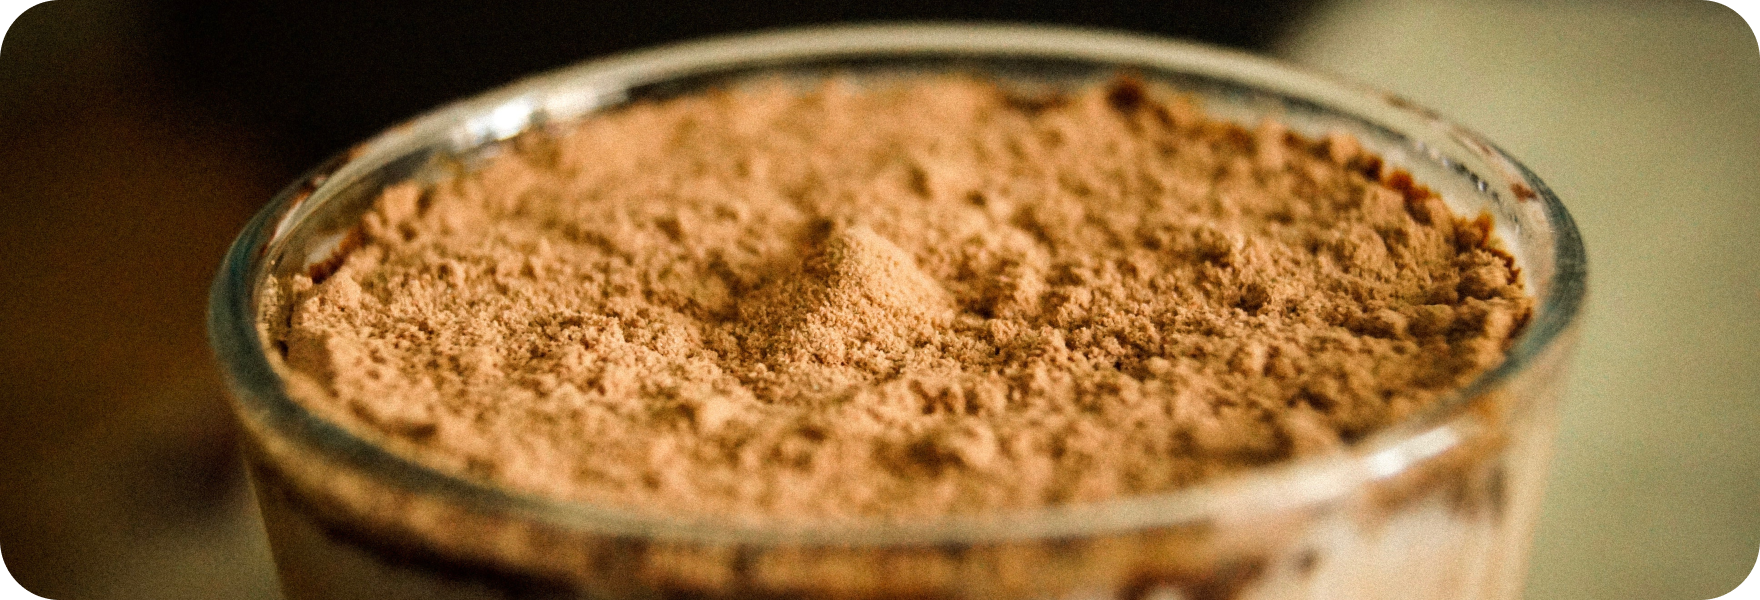 Can You Mix Pre-Workout with Protein Powder?